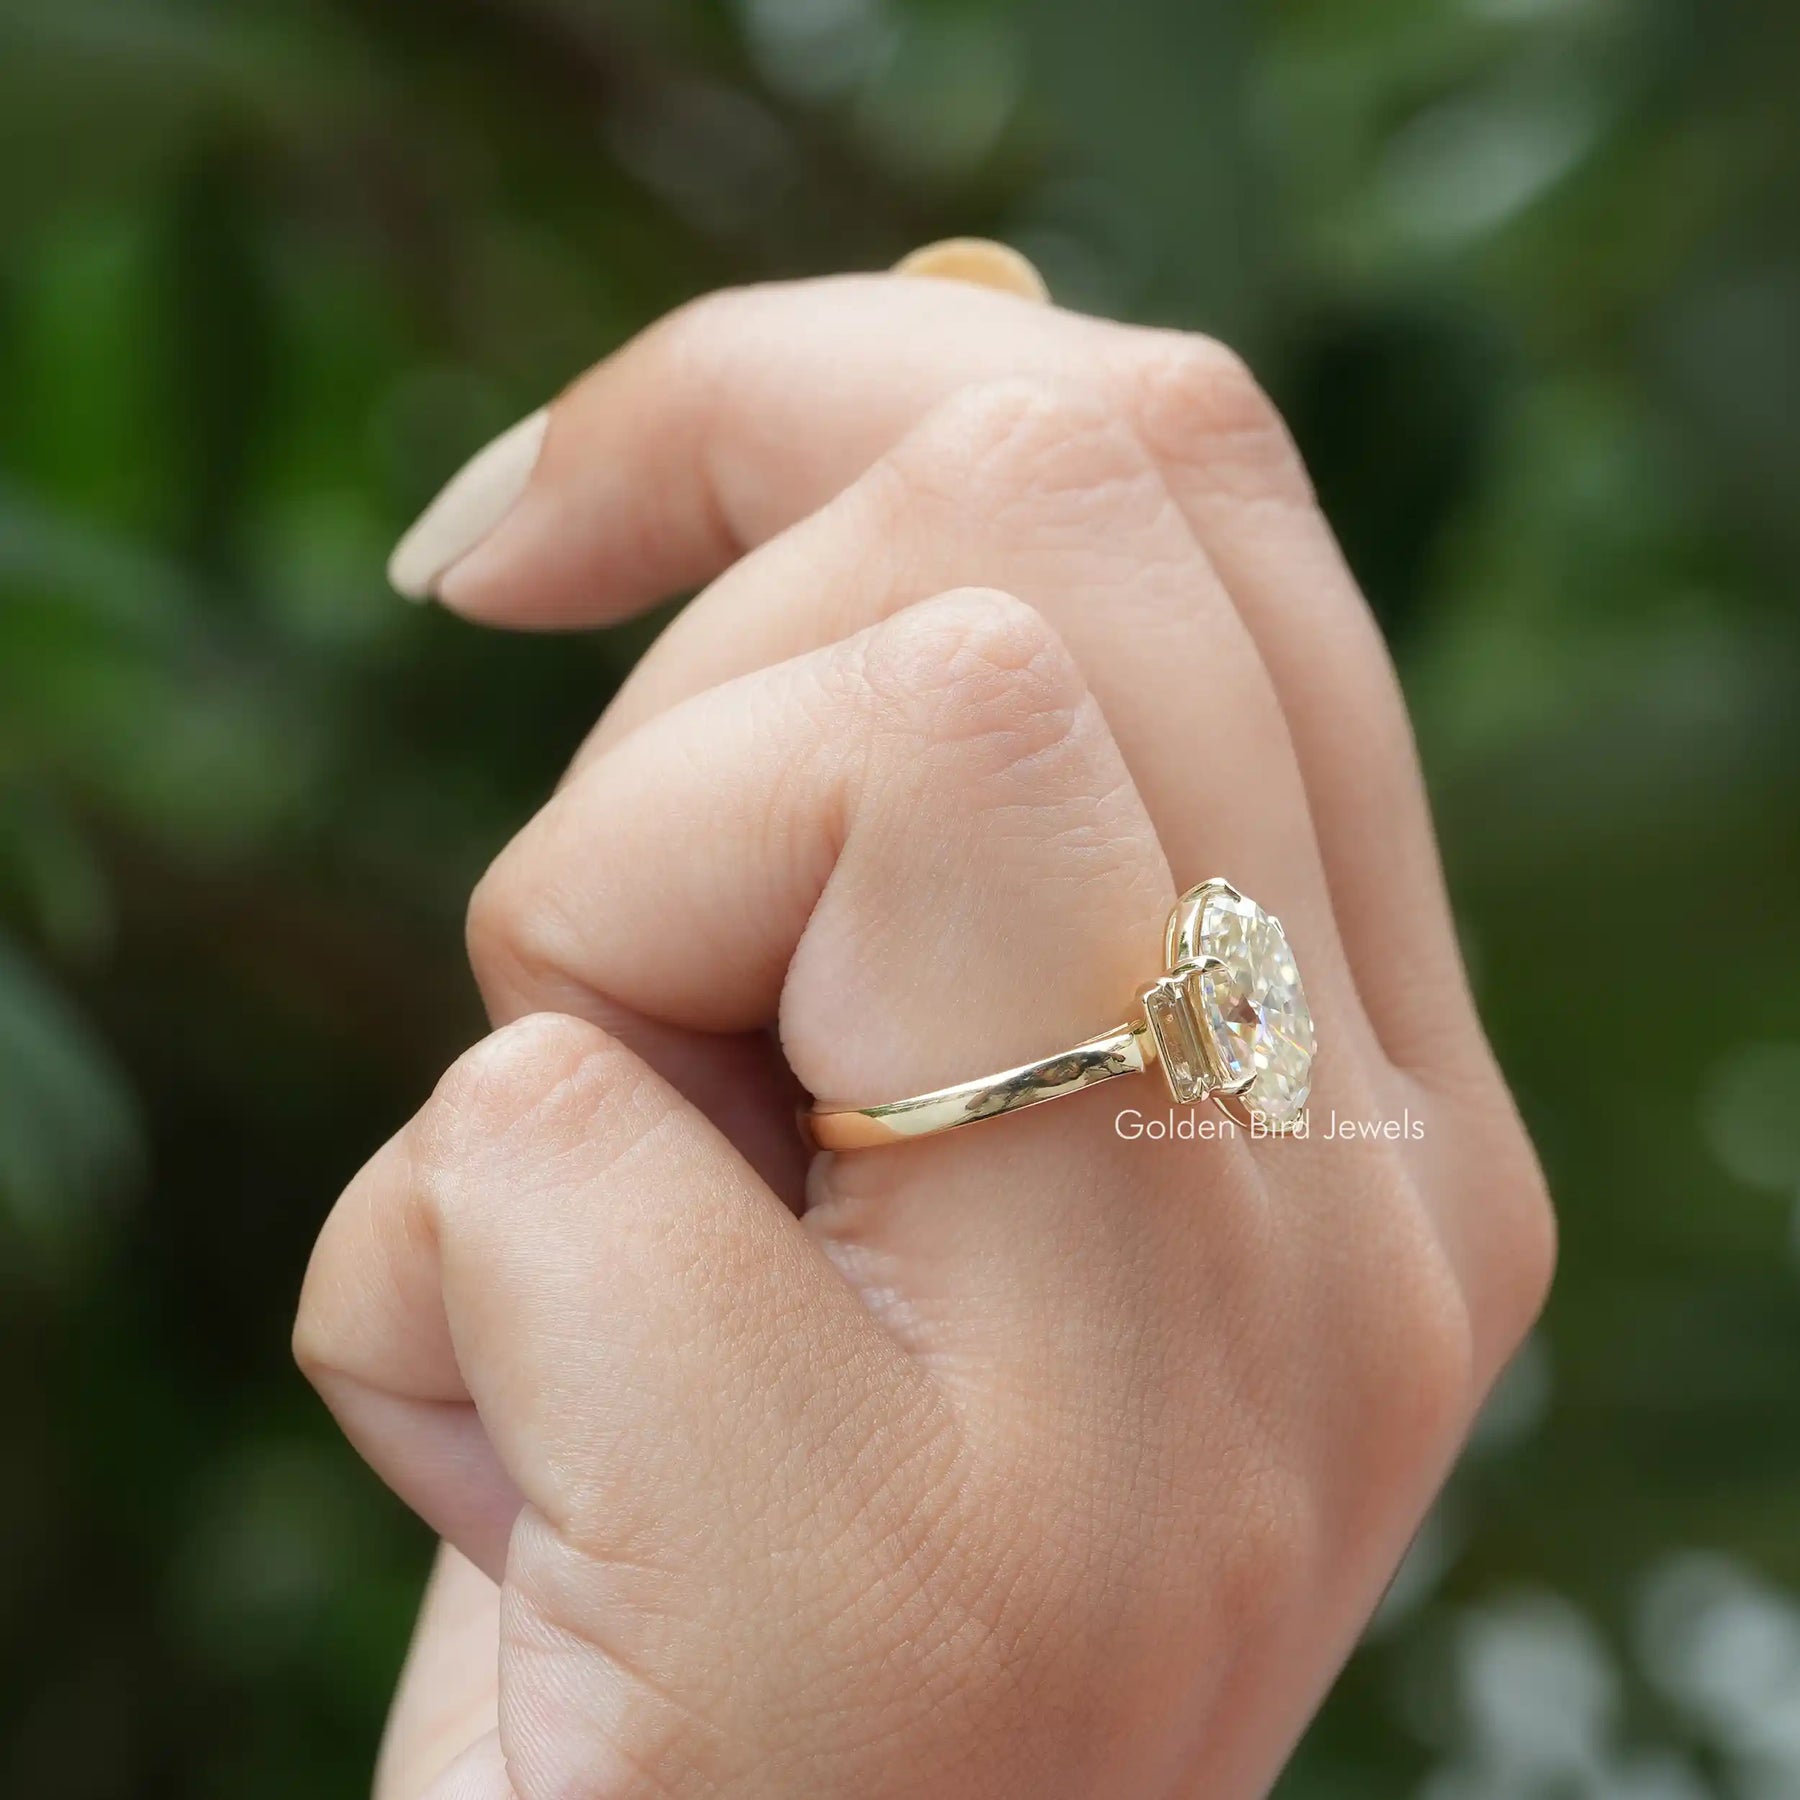 [Moval Cut Moissanite 3 Stone Engagement Ring]-[Golden Bird Jewels]